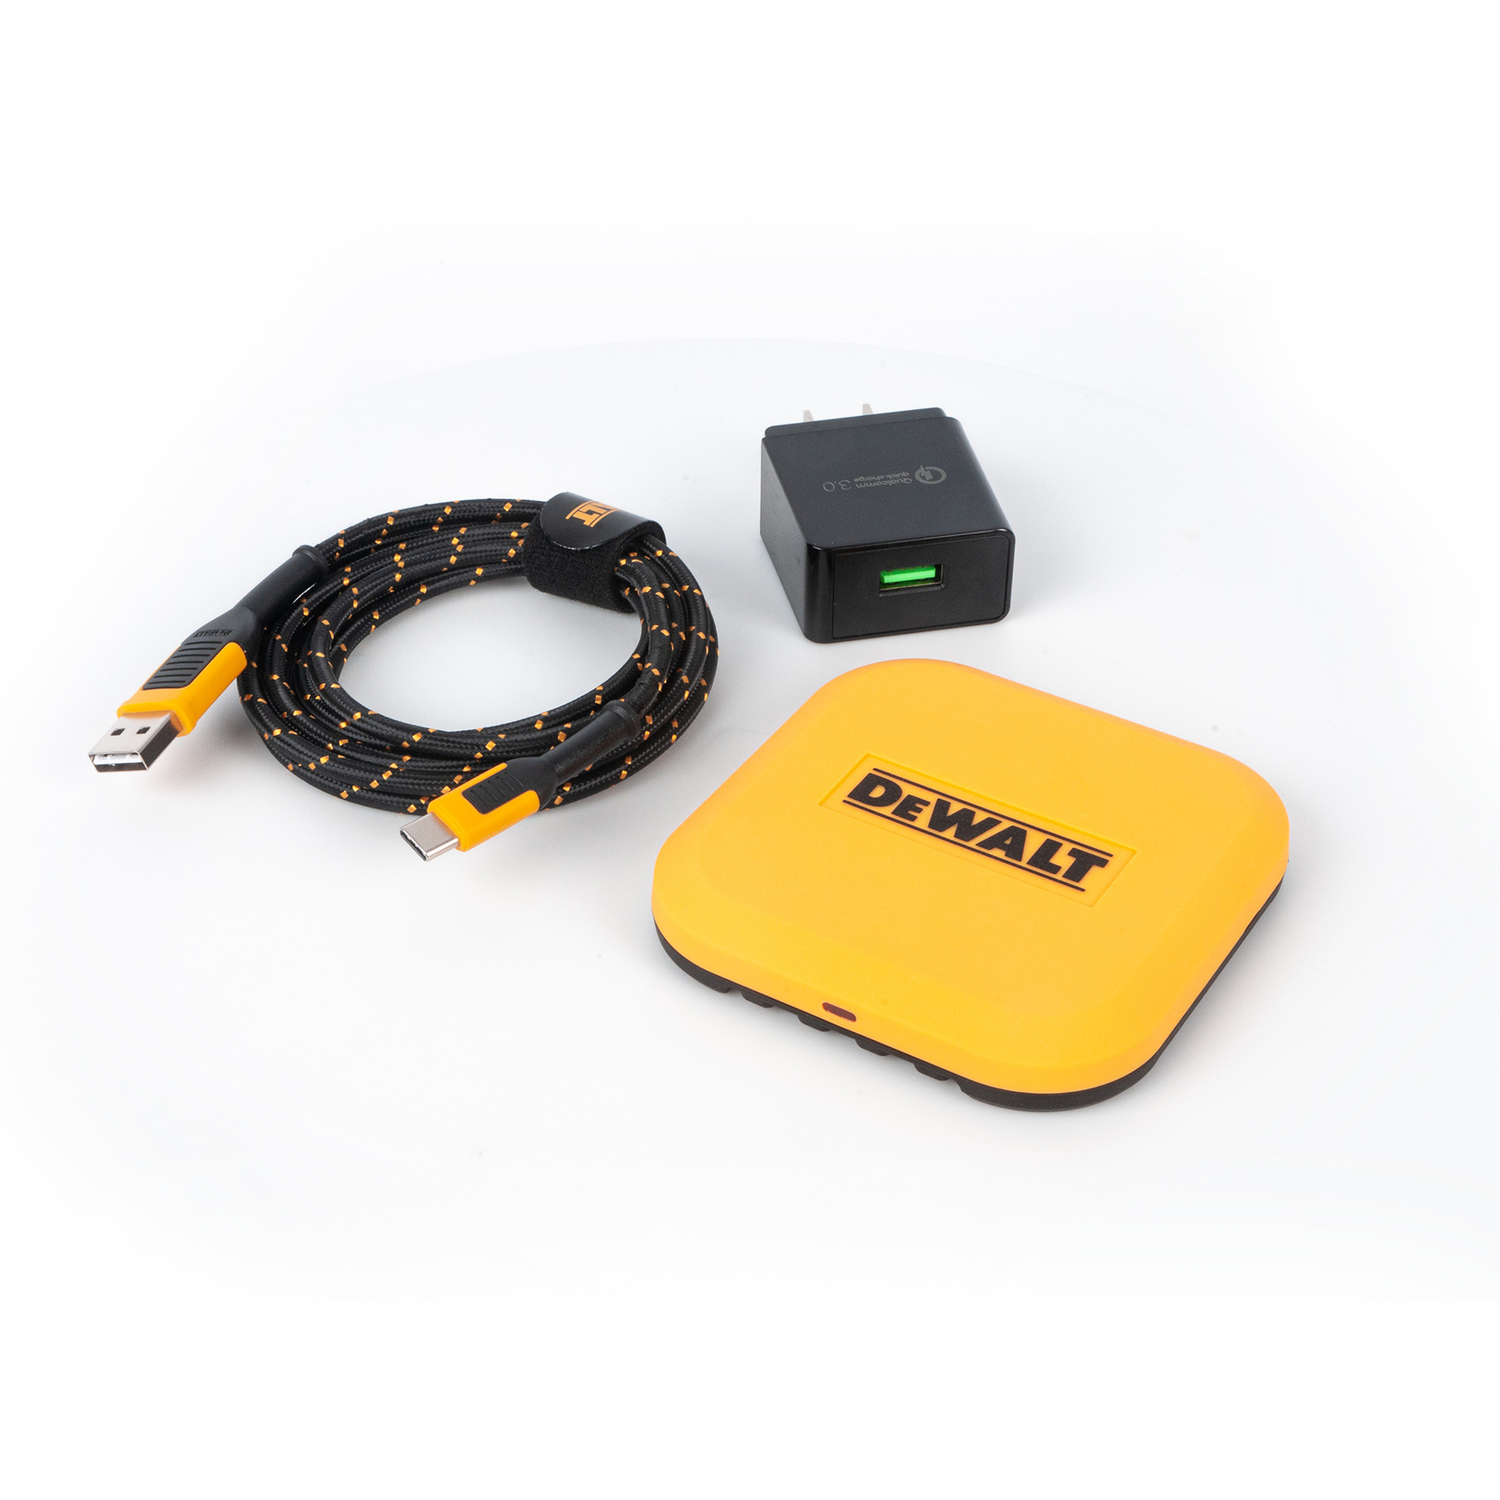 Photos - Mobile Phone Battery DeWALT Fast Wireless Charging Pad 141 0476 DW2 